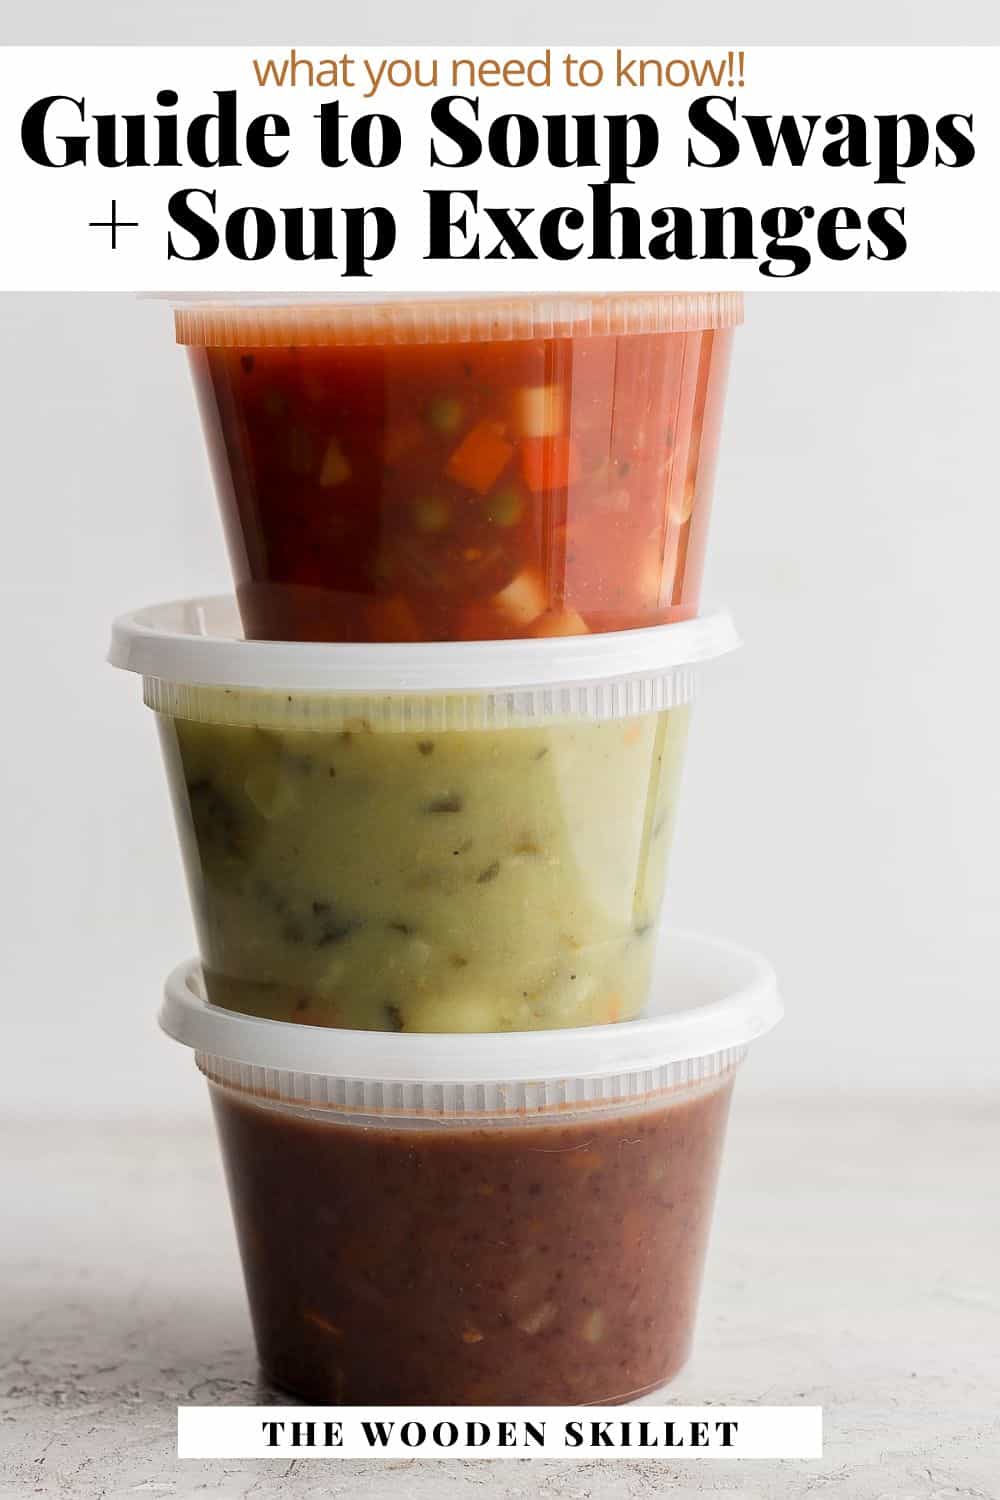 Pinterest image with the title "guild to soup swaps + soup exchanges" on the top with an image of three soups in plastic containers stacked on top of each other. 